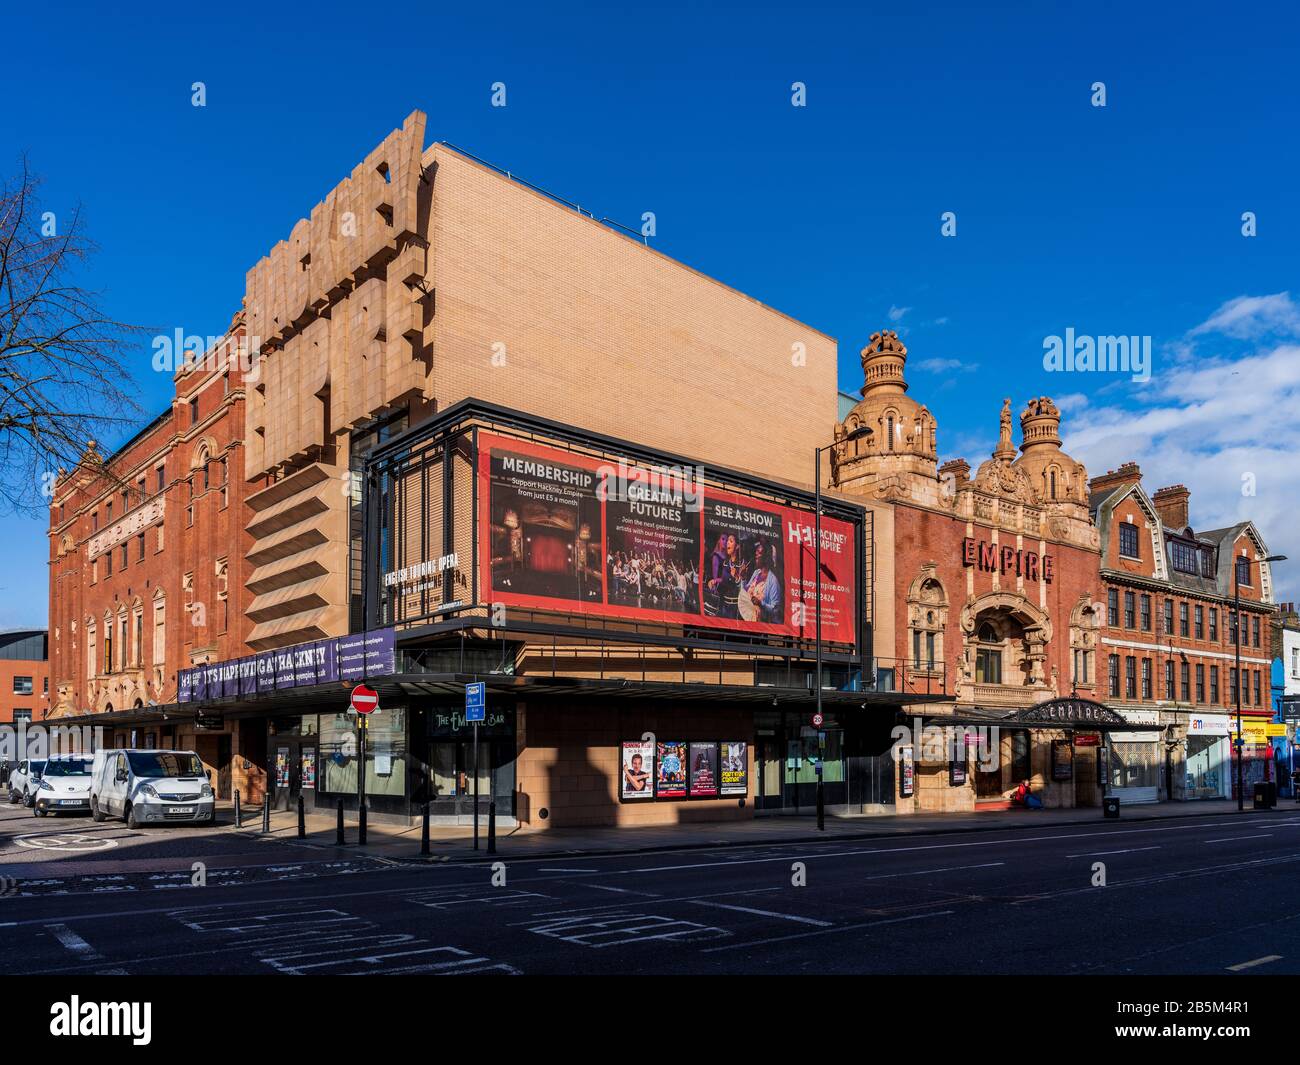 Hackney Empire Theatre in Hackney East London. Built in 1901 as a music hall original architect Frank Matcham, refurbished 2004 Tim Ronalds Architects Stock Photo